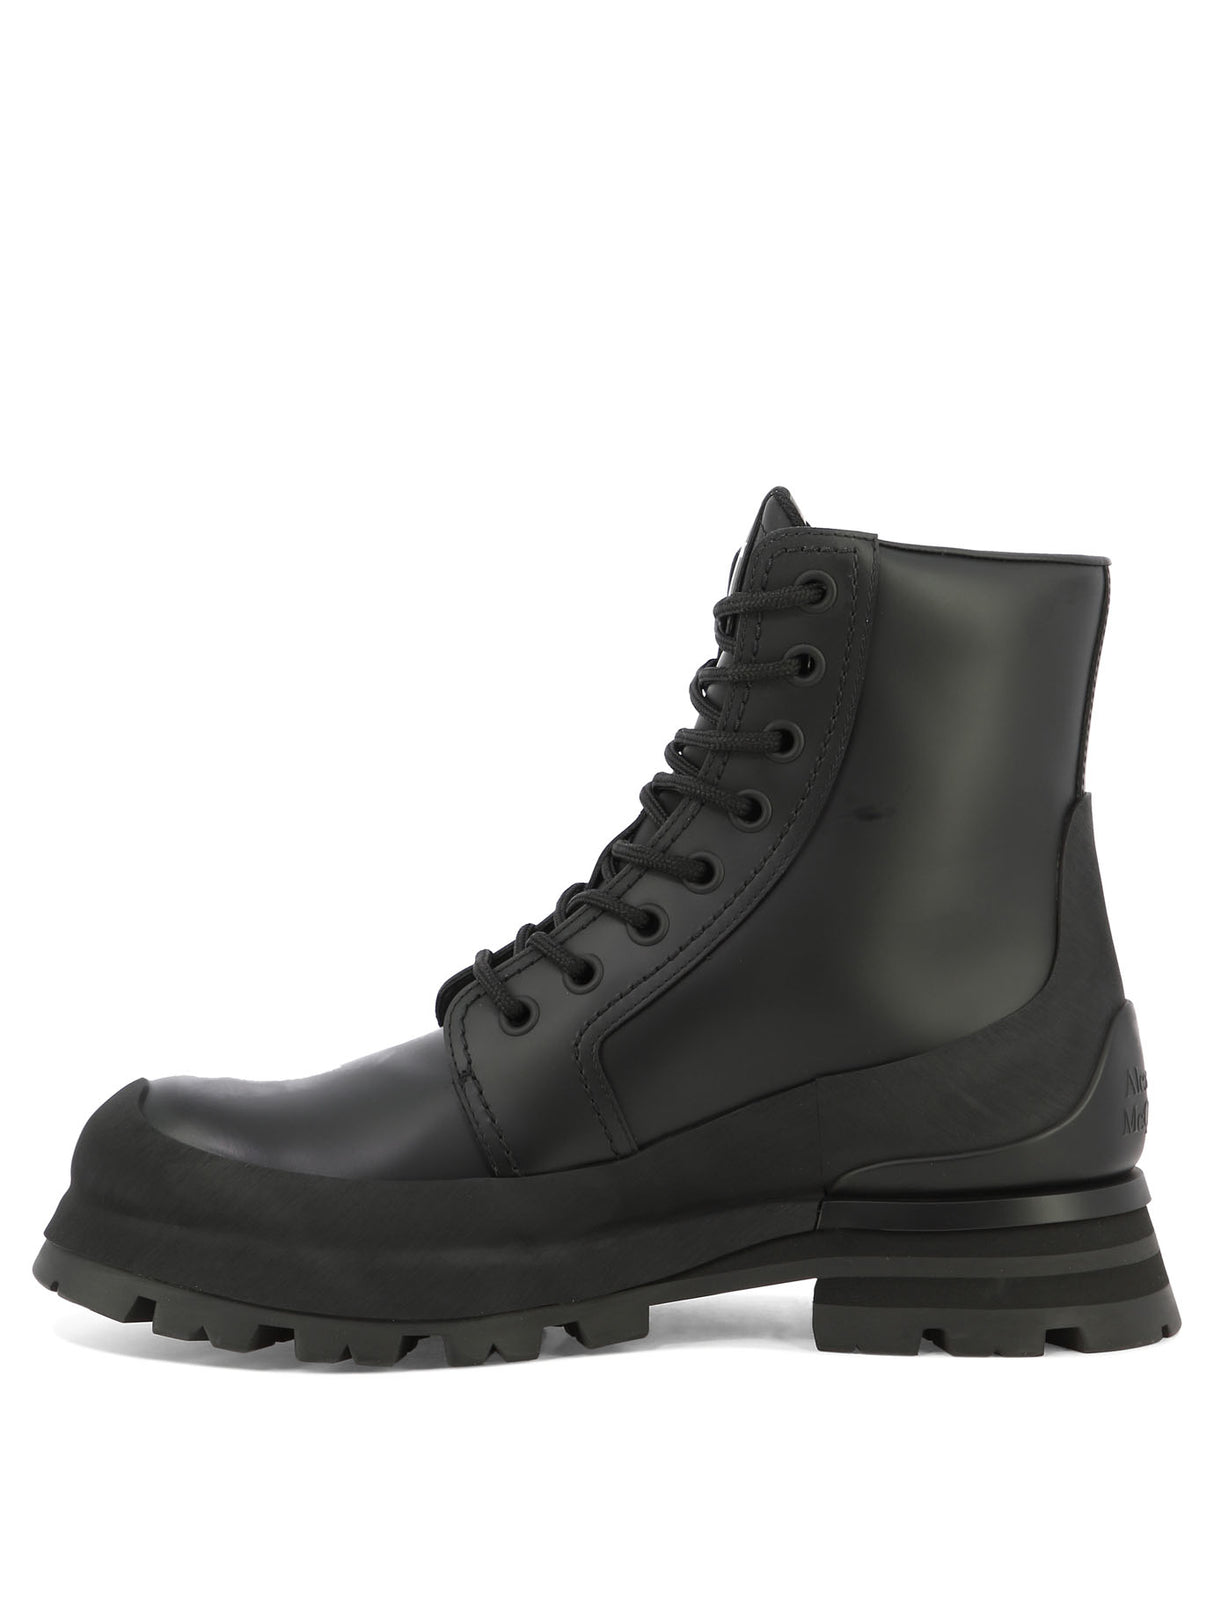 ALEXANDER MCQUEEN Lace-Up Boots for Men: HPSS24 Black Galosh-Inspired Flared 100% Leather & Rubber